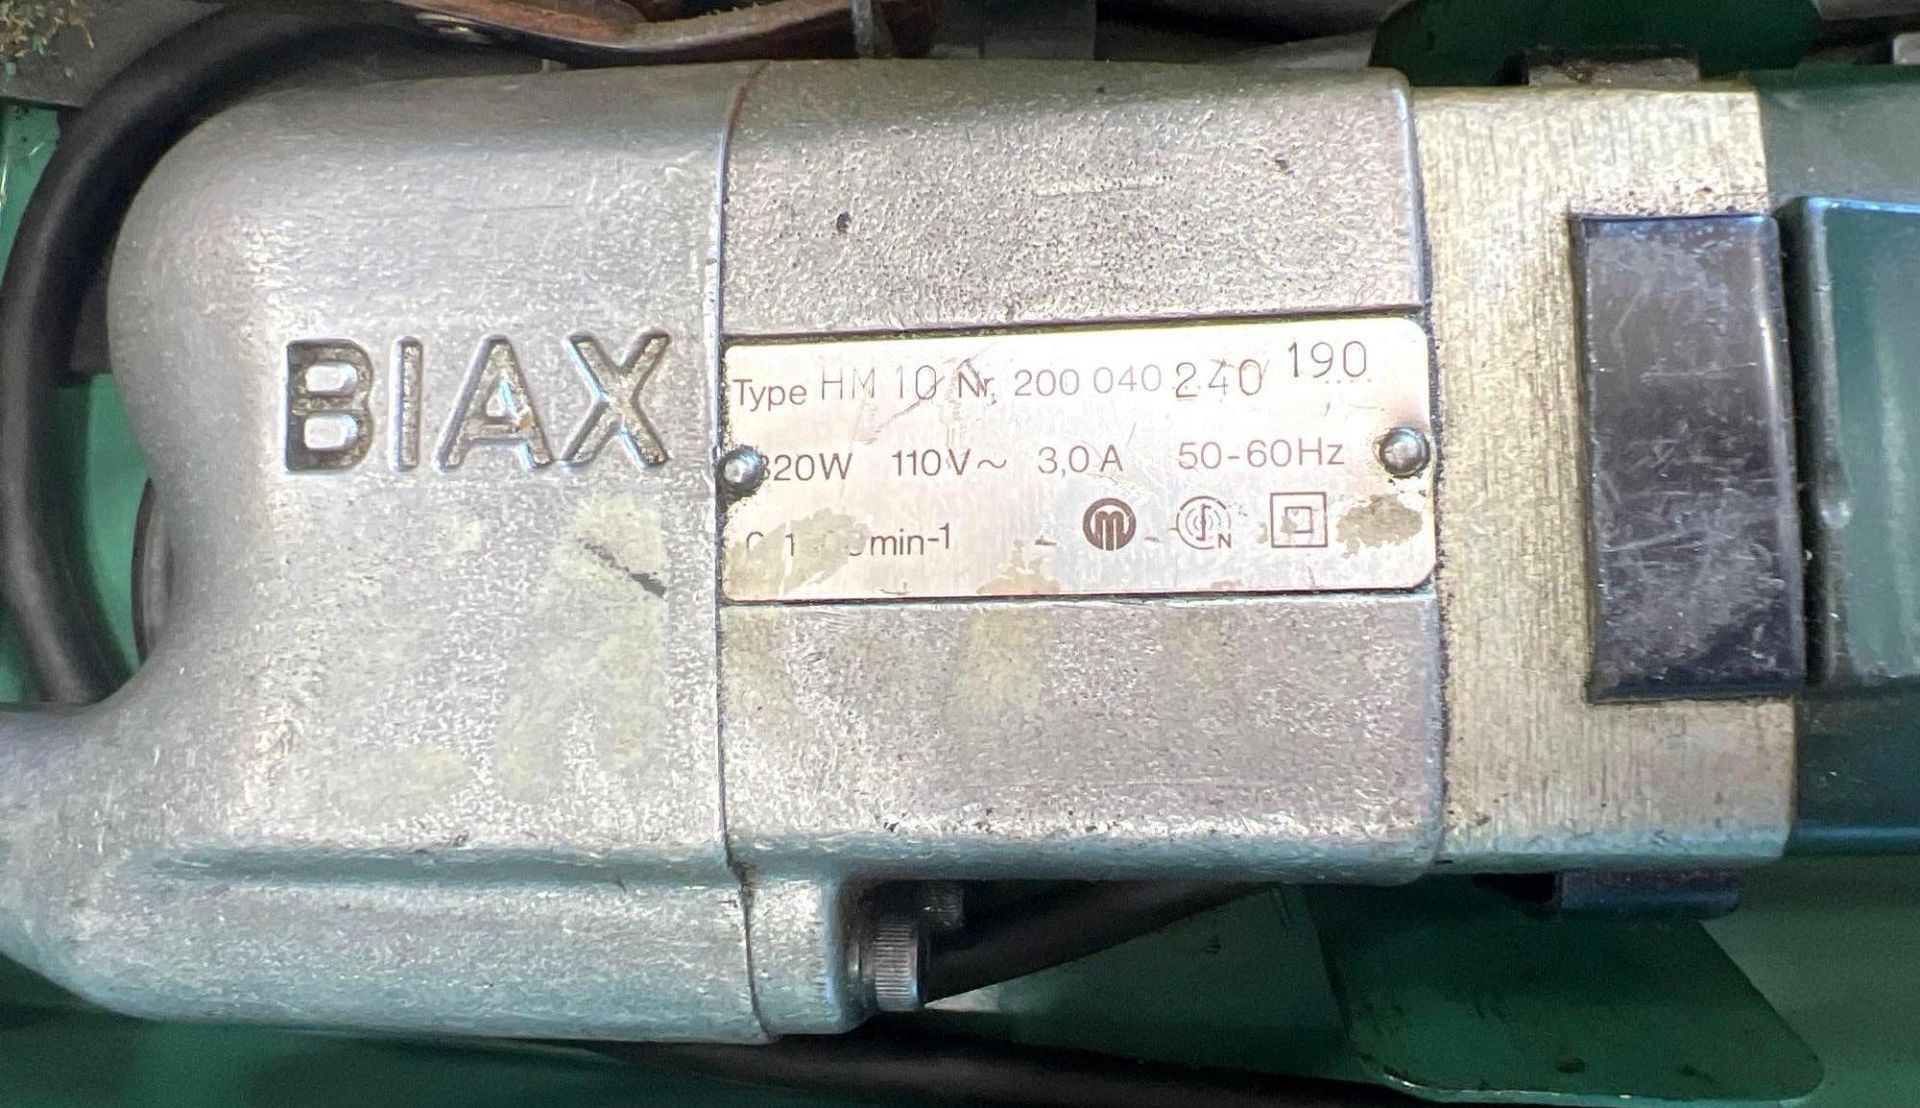 Biax HM-10 Power Scraper, 110V with Case - Image 5 of 6